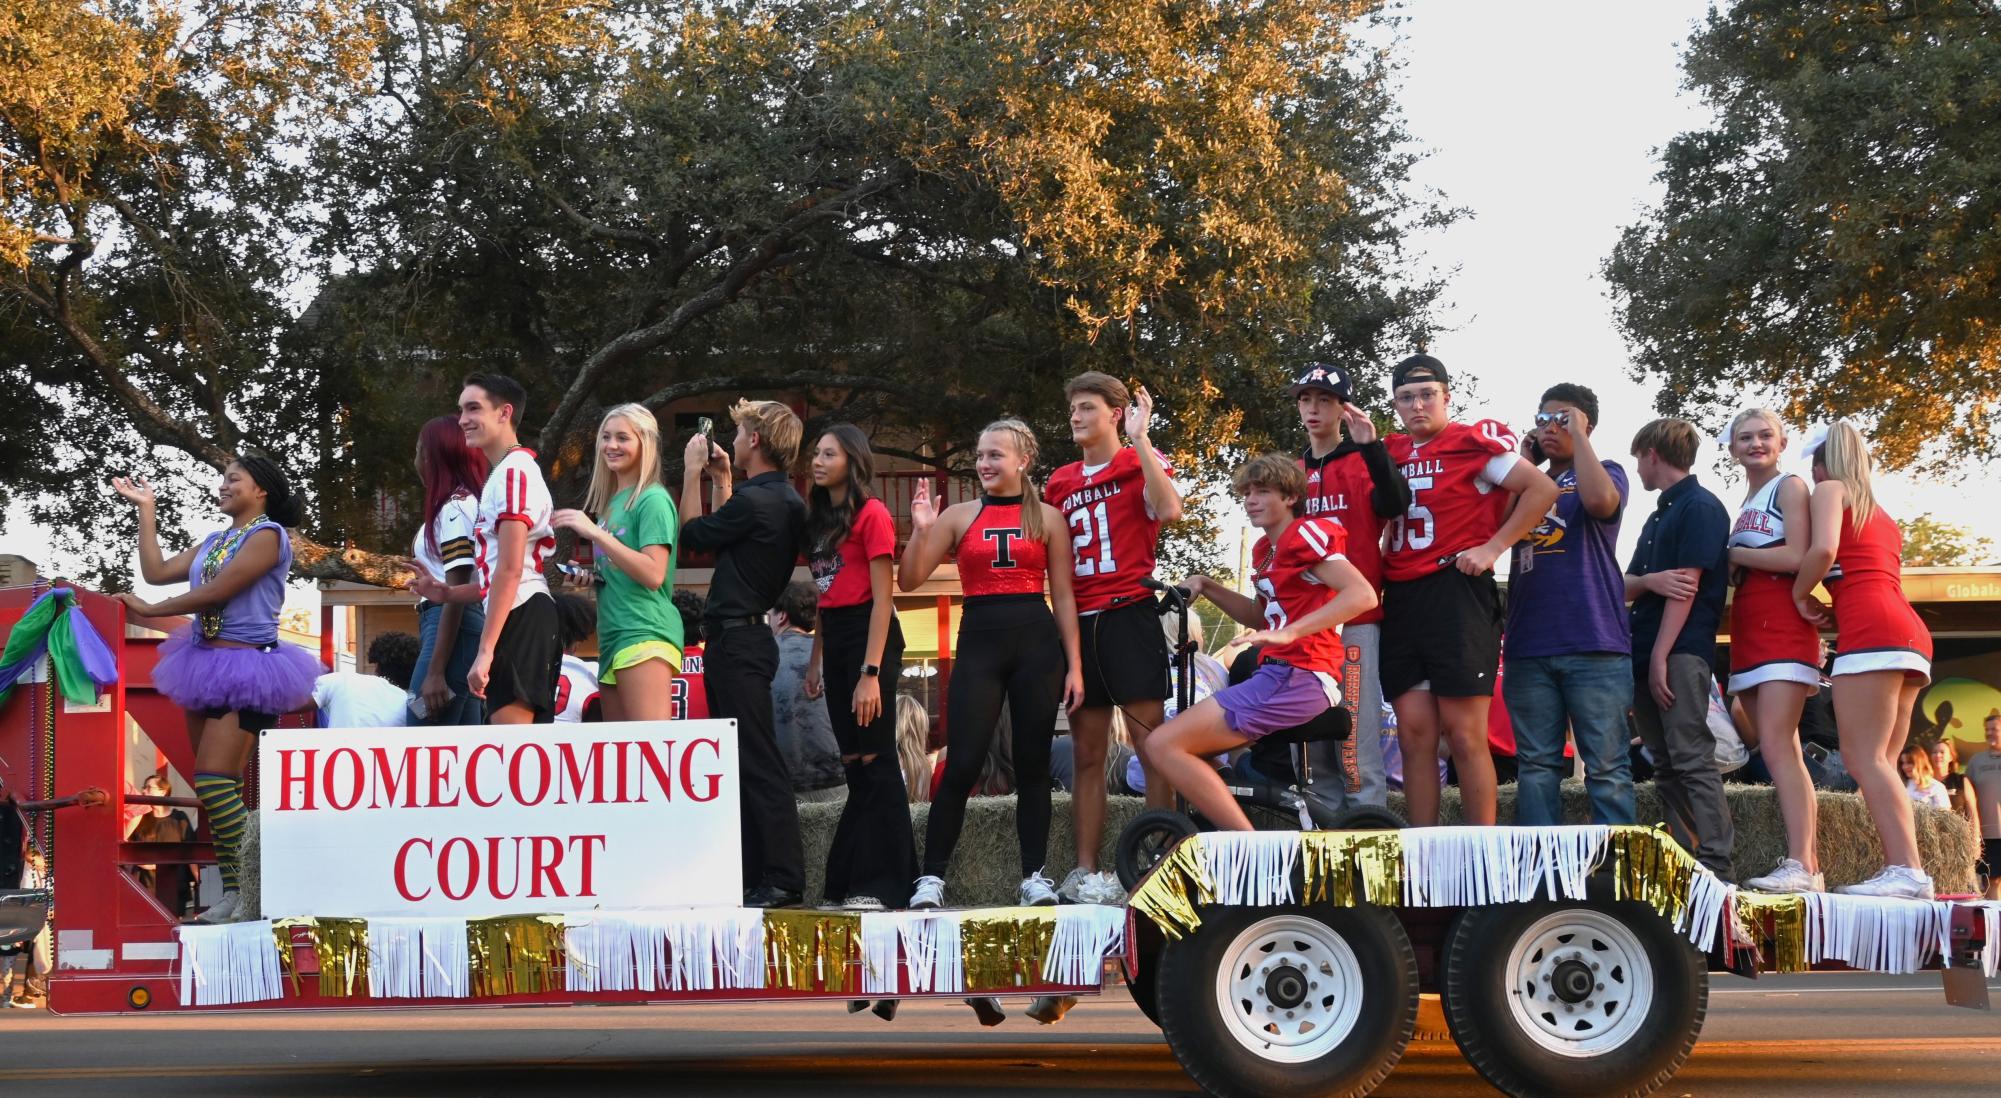 2022 Homecoming Court during the HOCO Parade